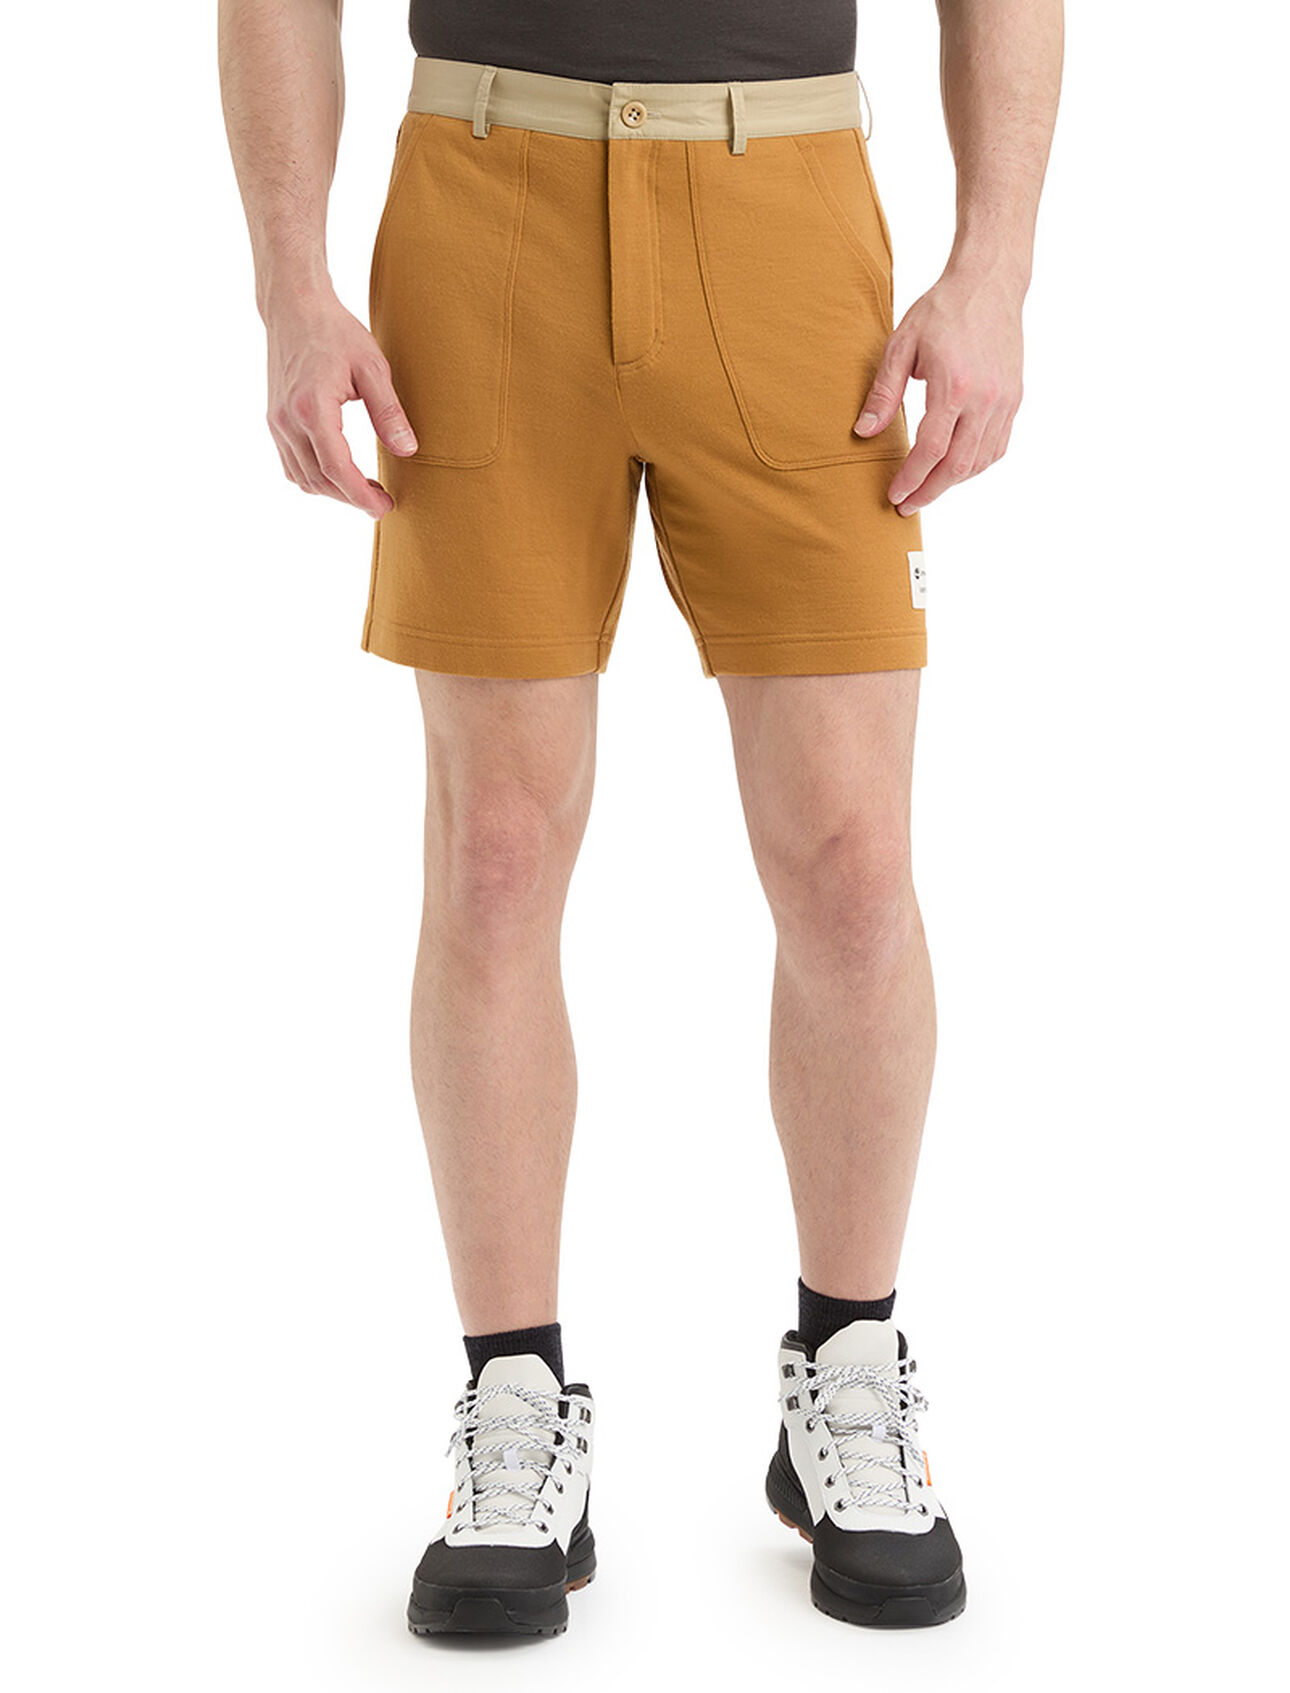 Mens Timberland x icebreaker Merino Terry Chino Shorts Designed in collaboration with Timberland, the Timberland x icebreaker Merino Terry Chino Shorts offer classic chino styling with an ultra-soft merino terry fabric.